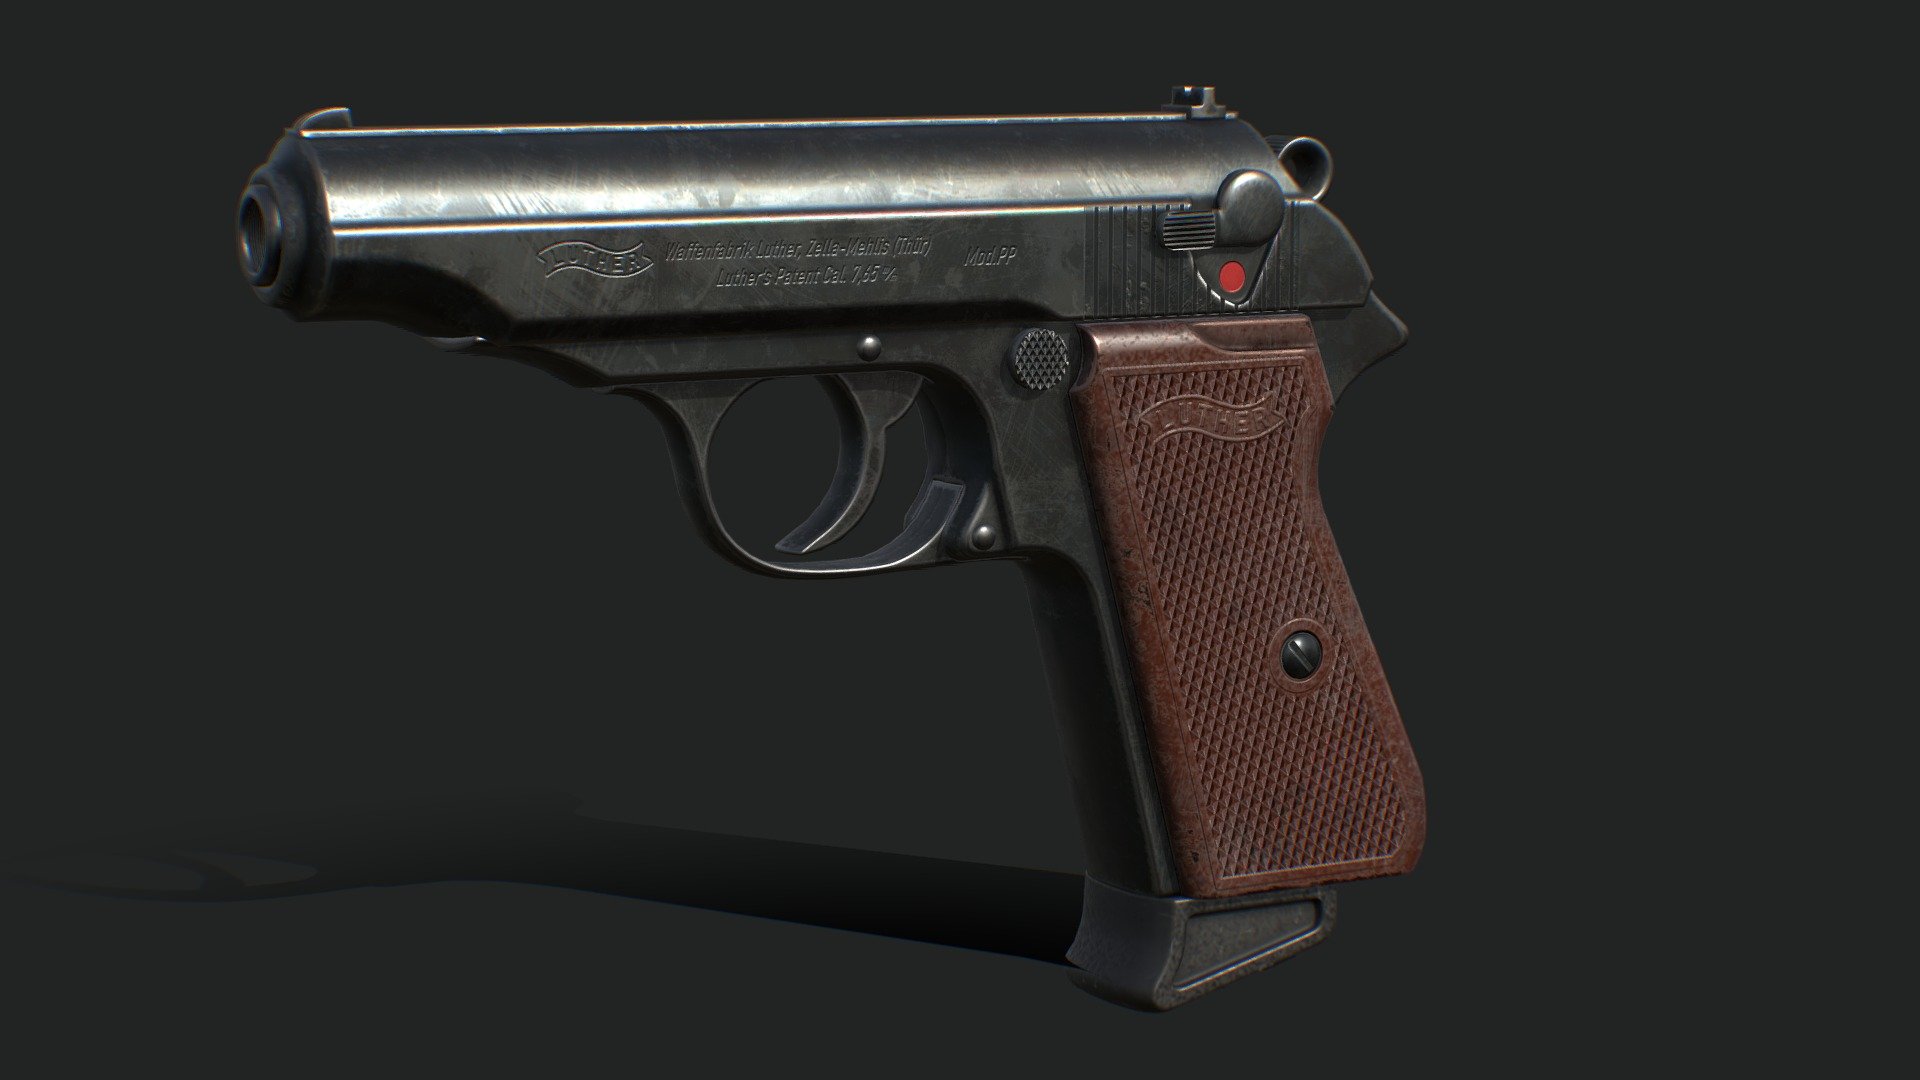 A quick model of a Walther PP pistol. Logos etc changed to Luther instead of Walther 3d model